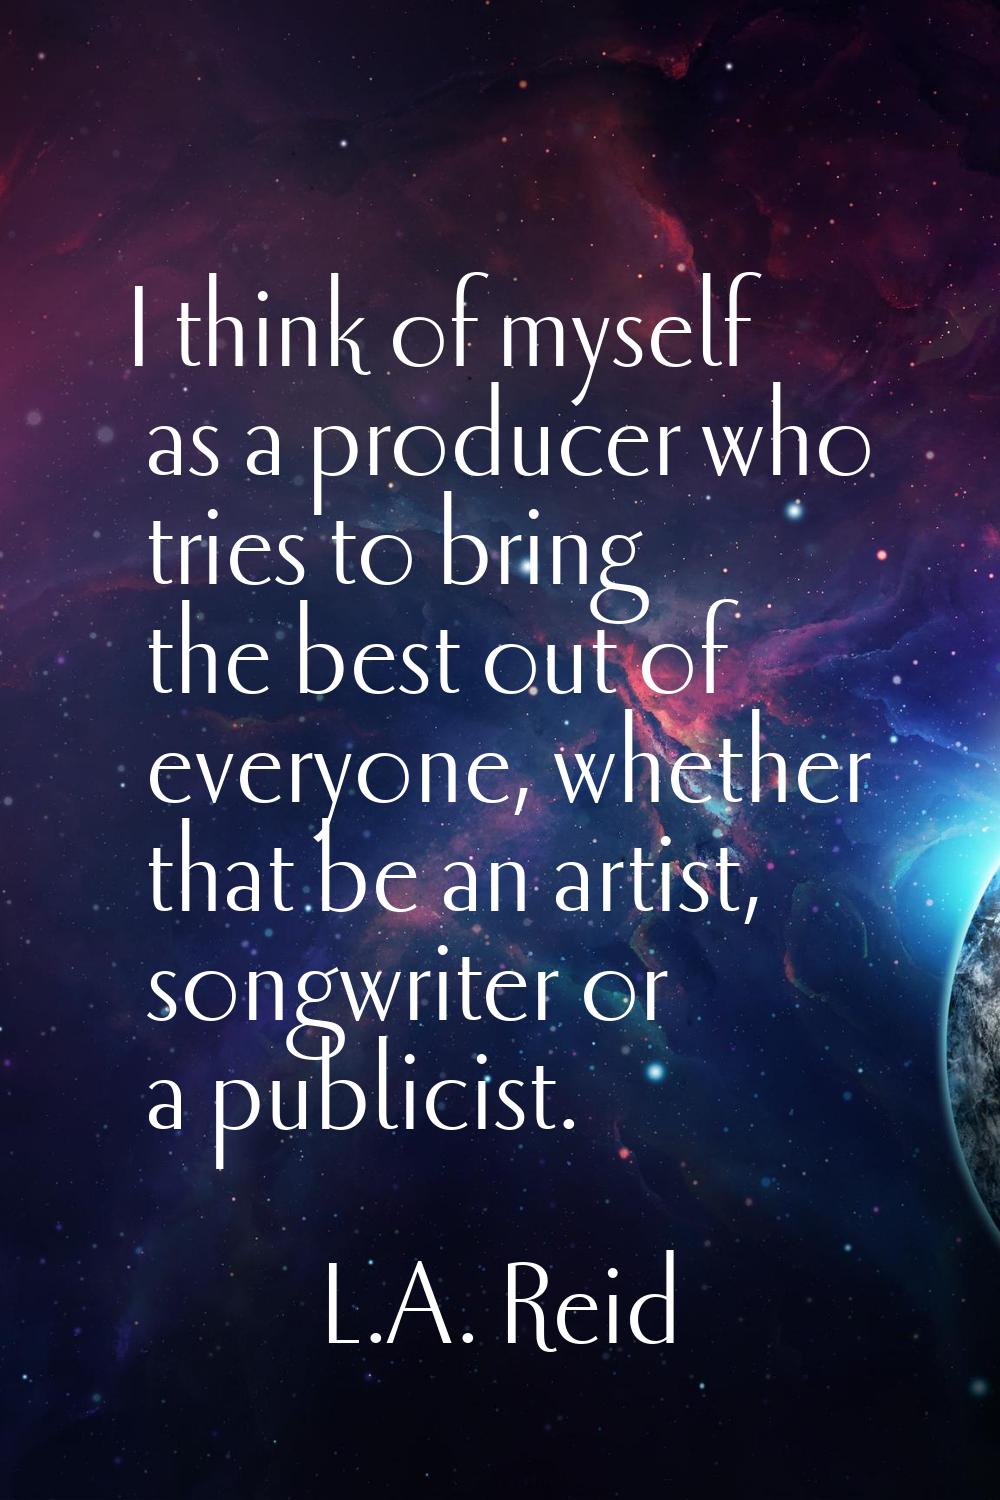 I think of myself as a producer who tries to bring the best out of everyone, whether that be an art